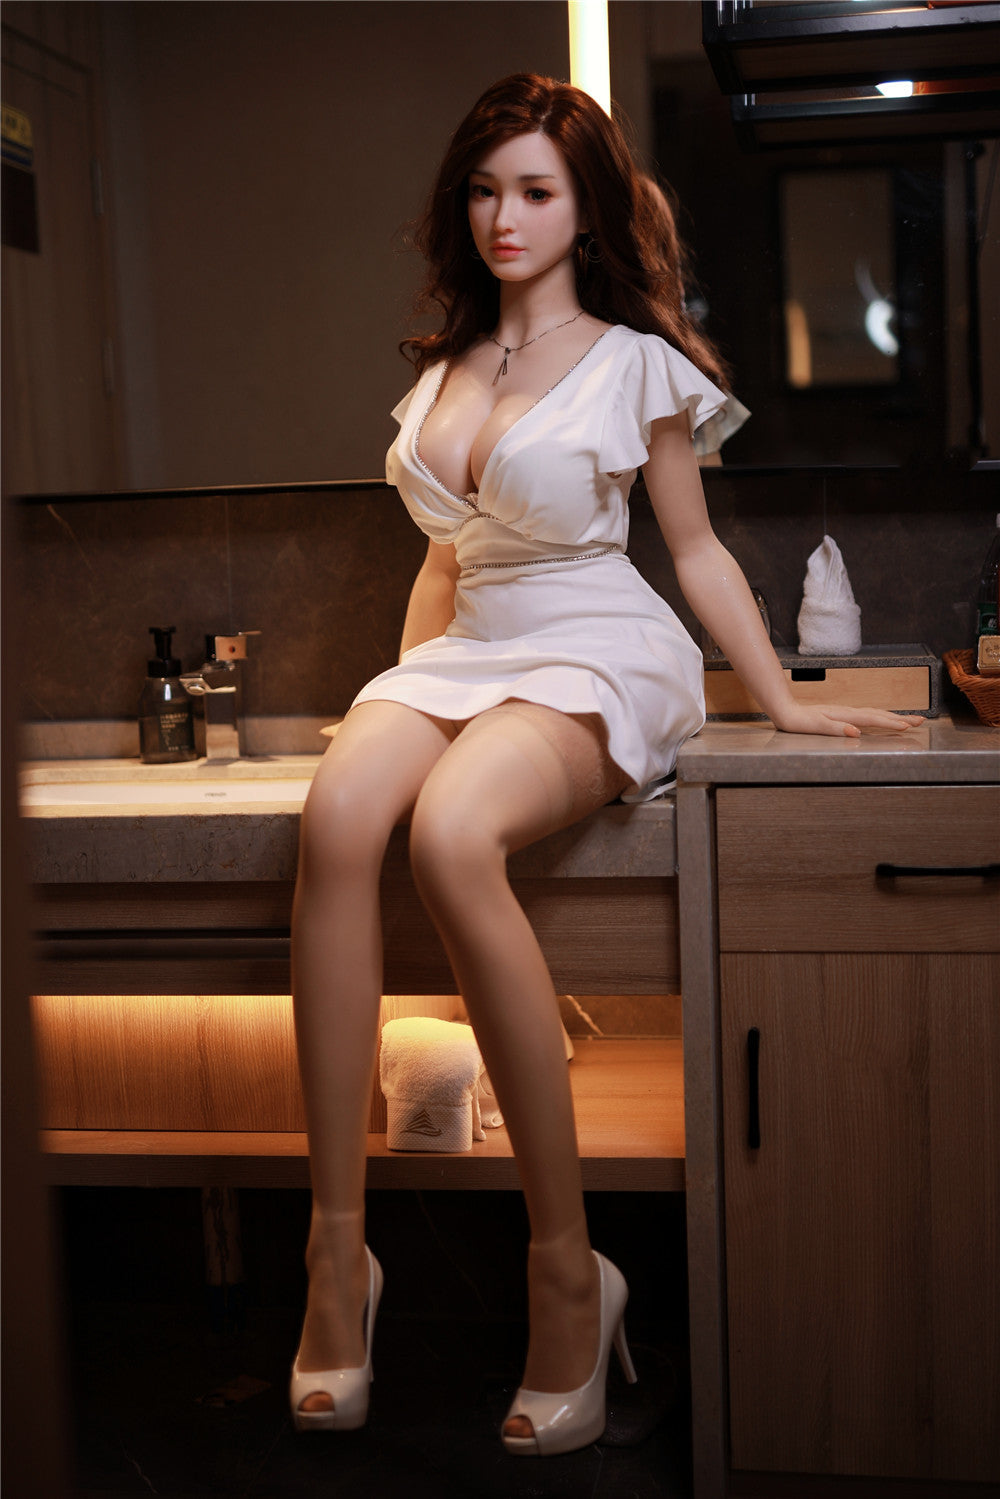 JY Doll 163 cm Silicone - Amlly | Buy Sex Dolls at DOLLS ACTUALLY